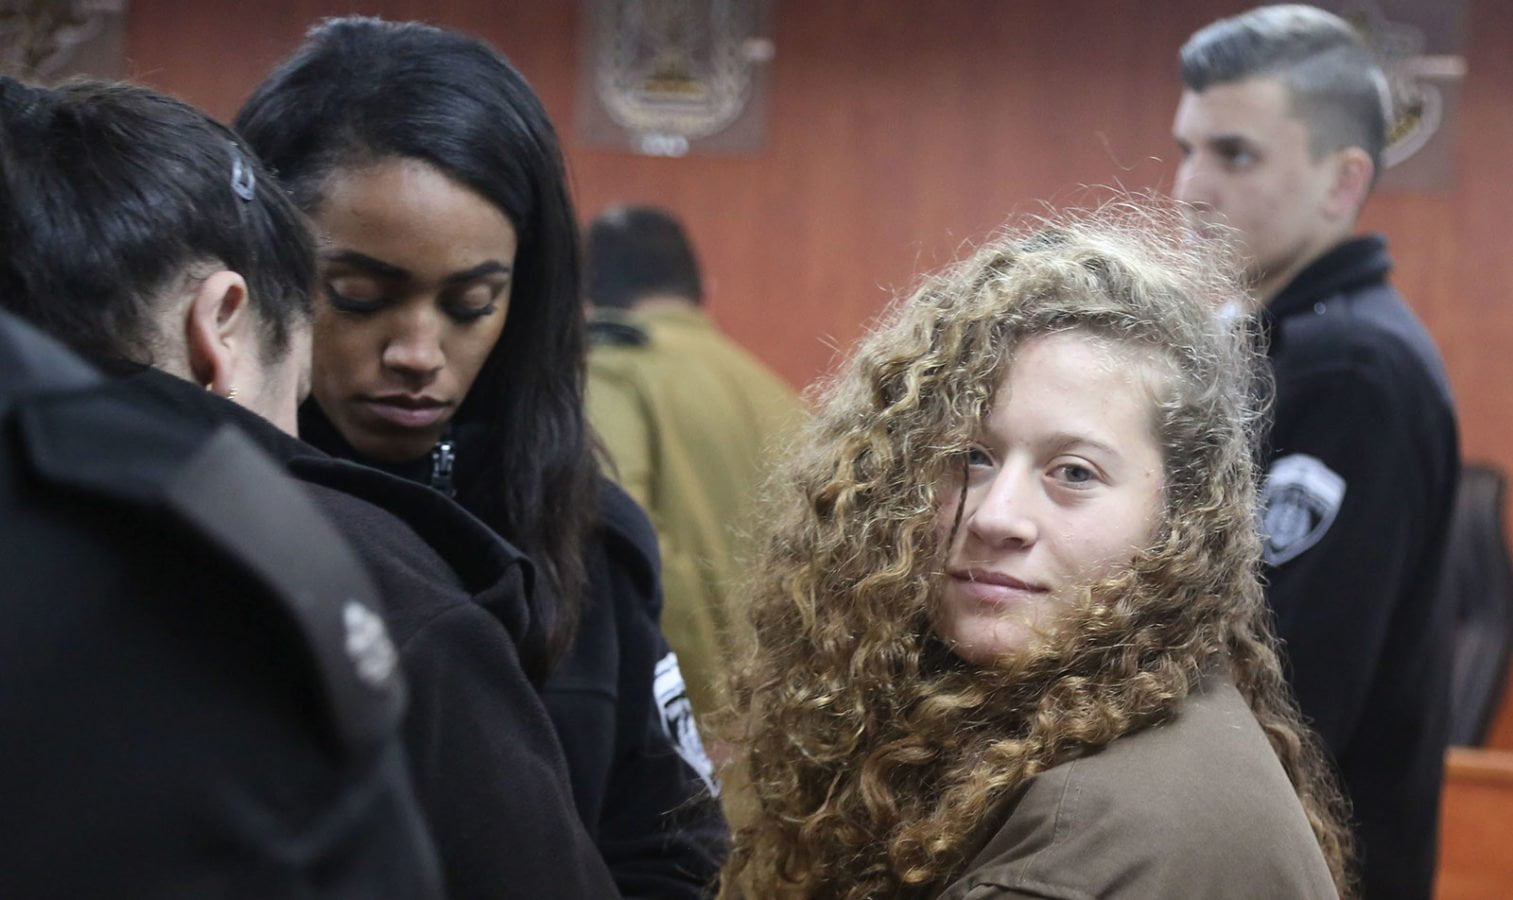 A young woman with curly hair and wearing a brown jacket stands in a court room surrounded by guards. She is looking at the camera.